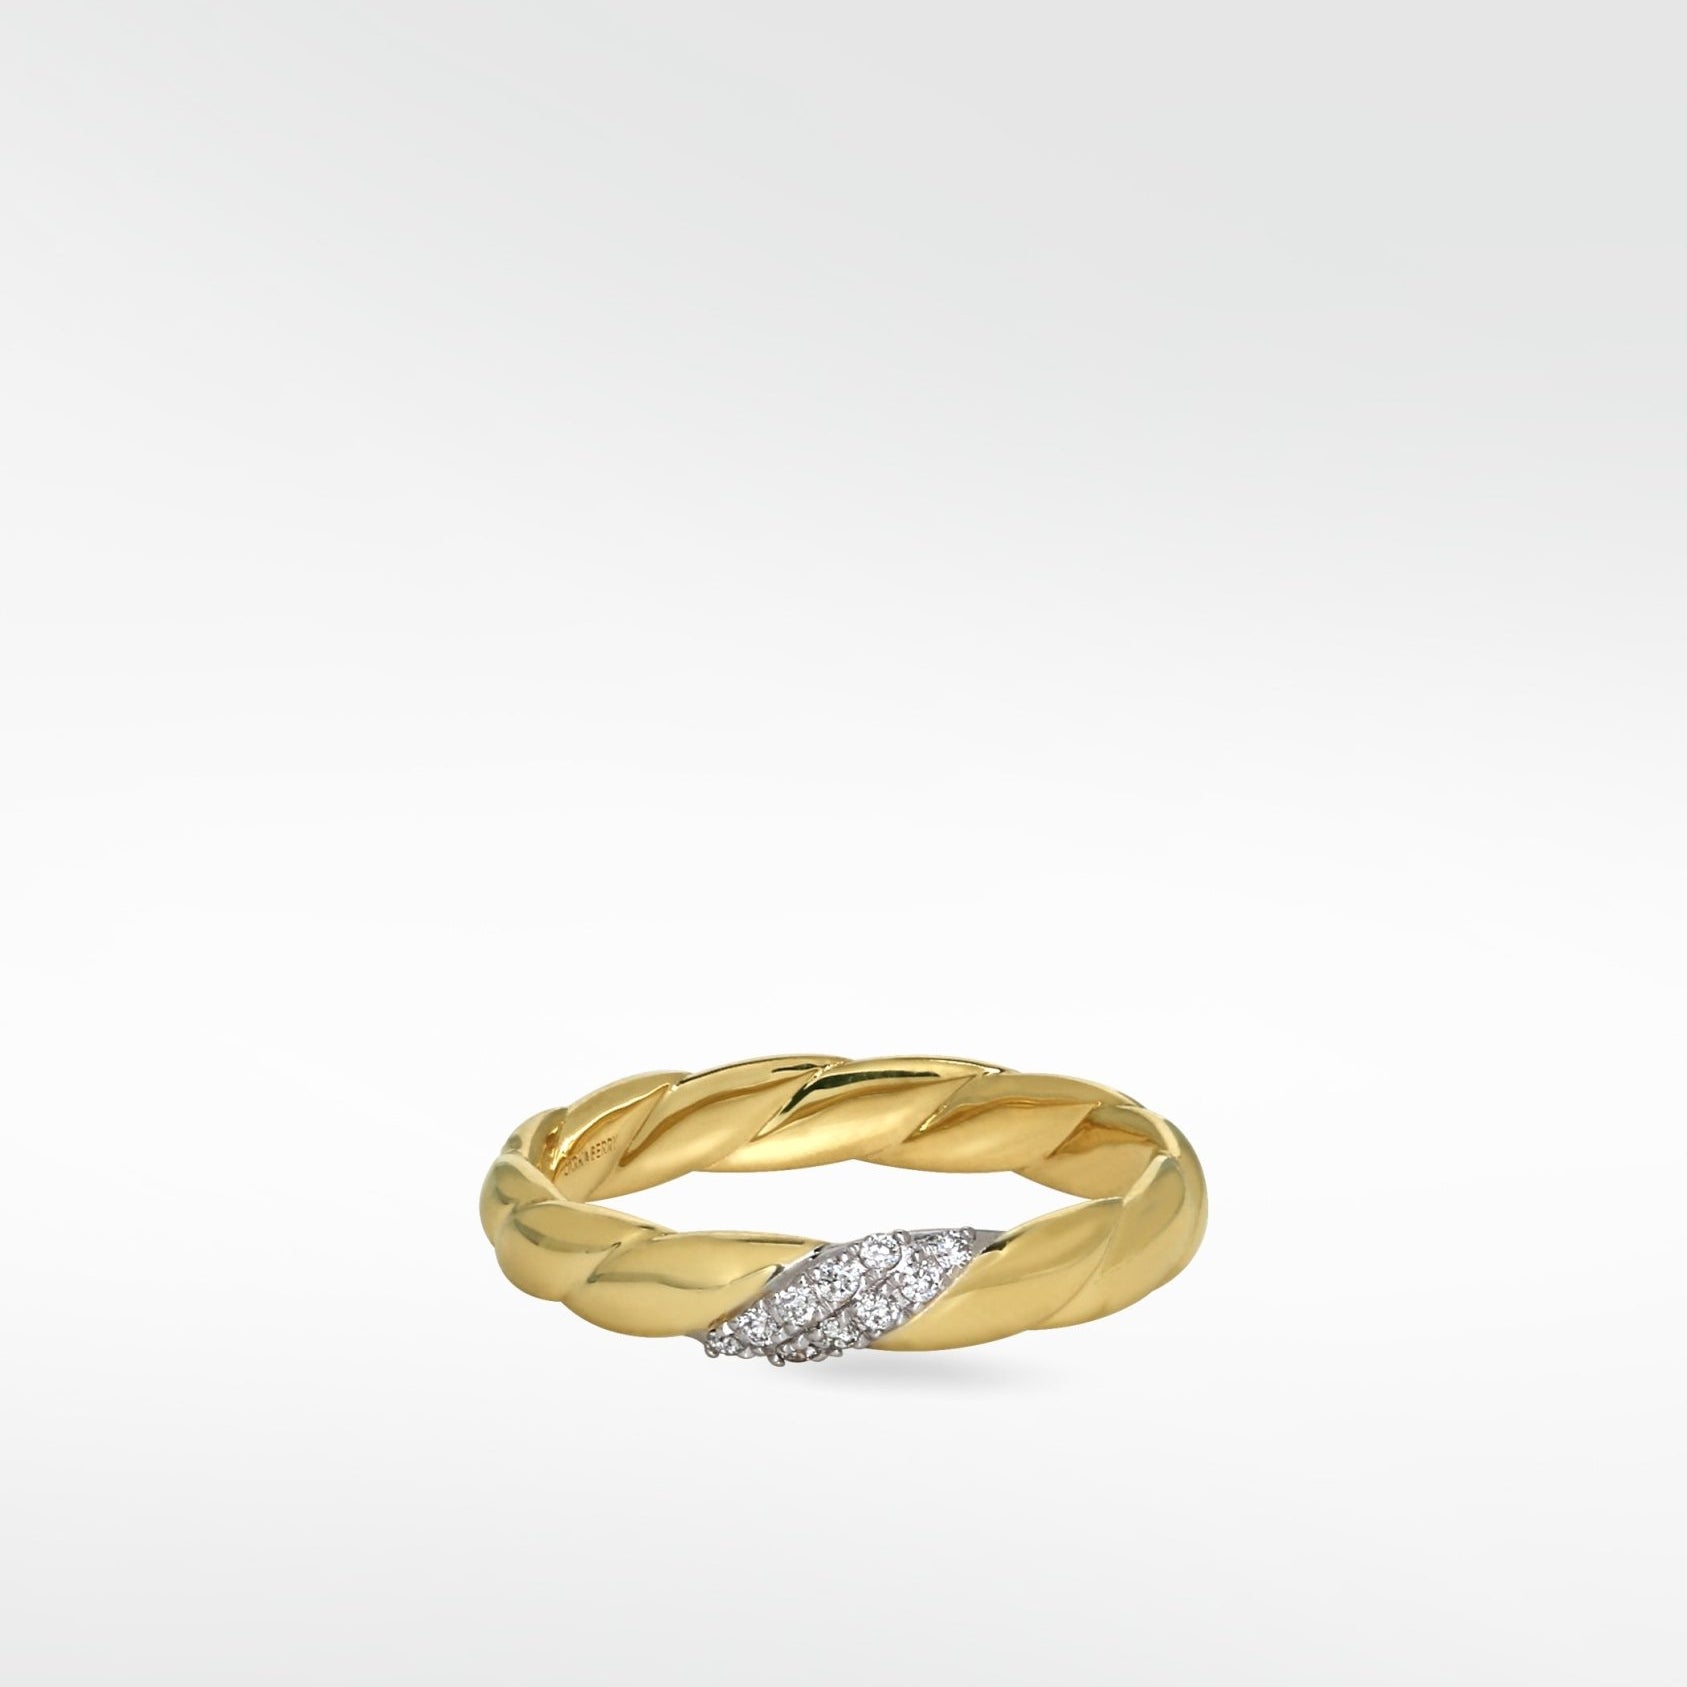 Modernist Twist Ring in 14k Yellow Gold - Lark and Berry